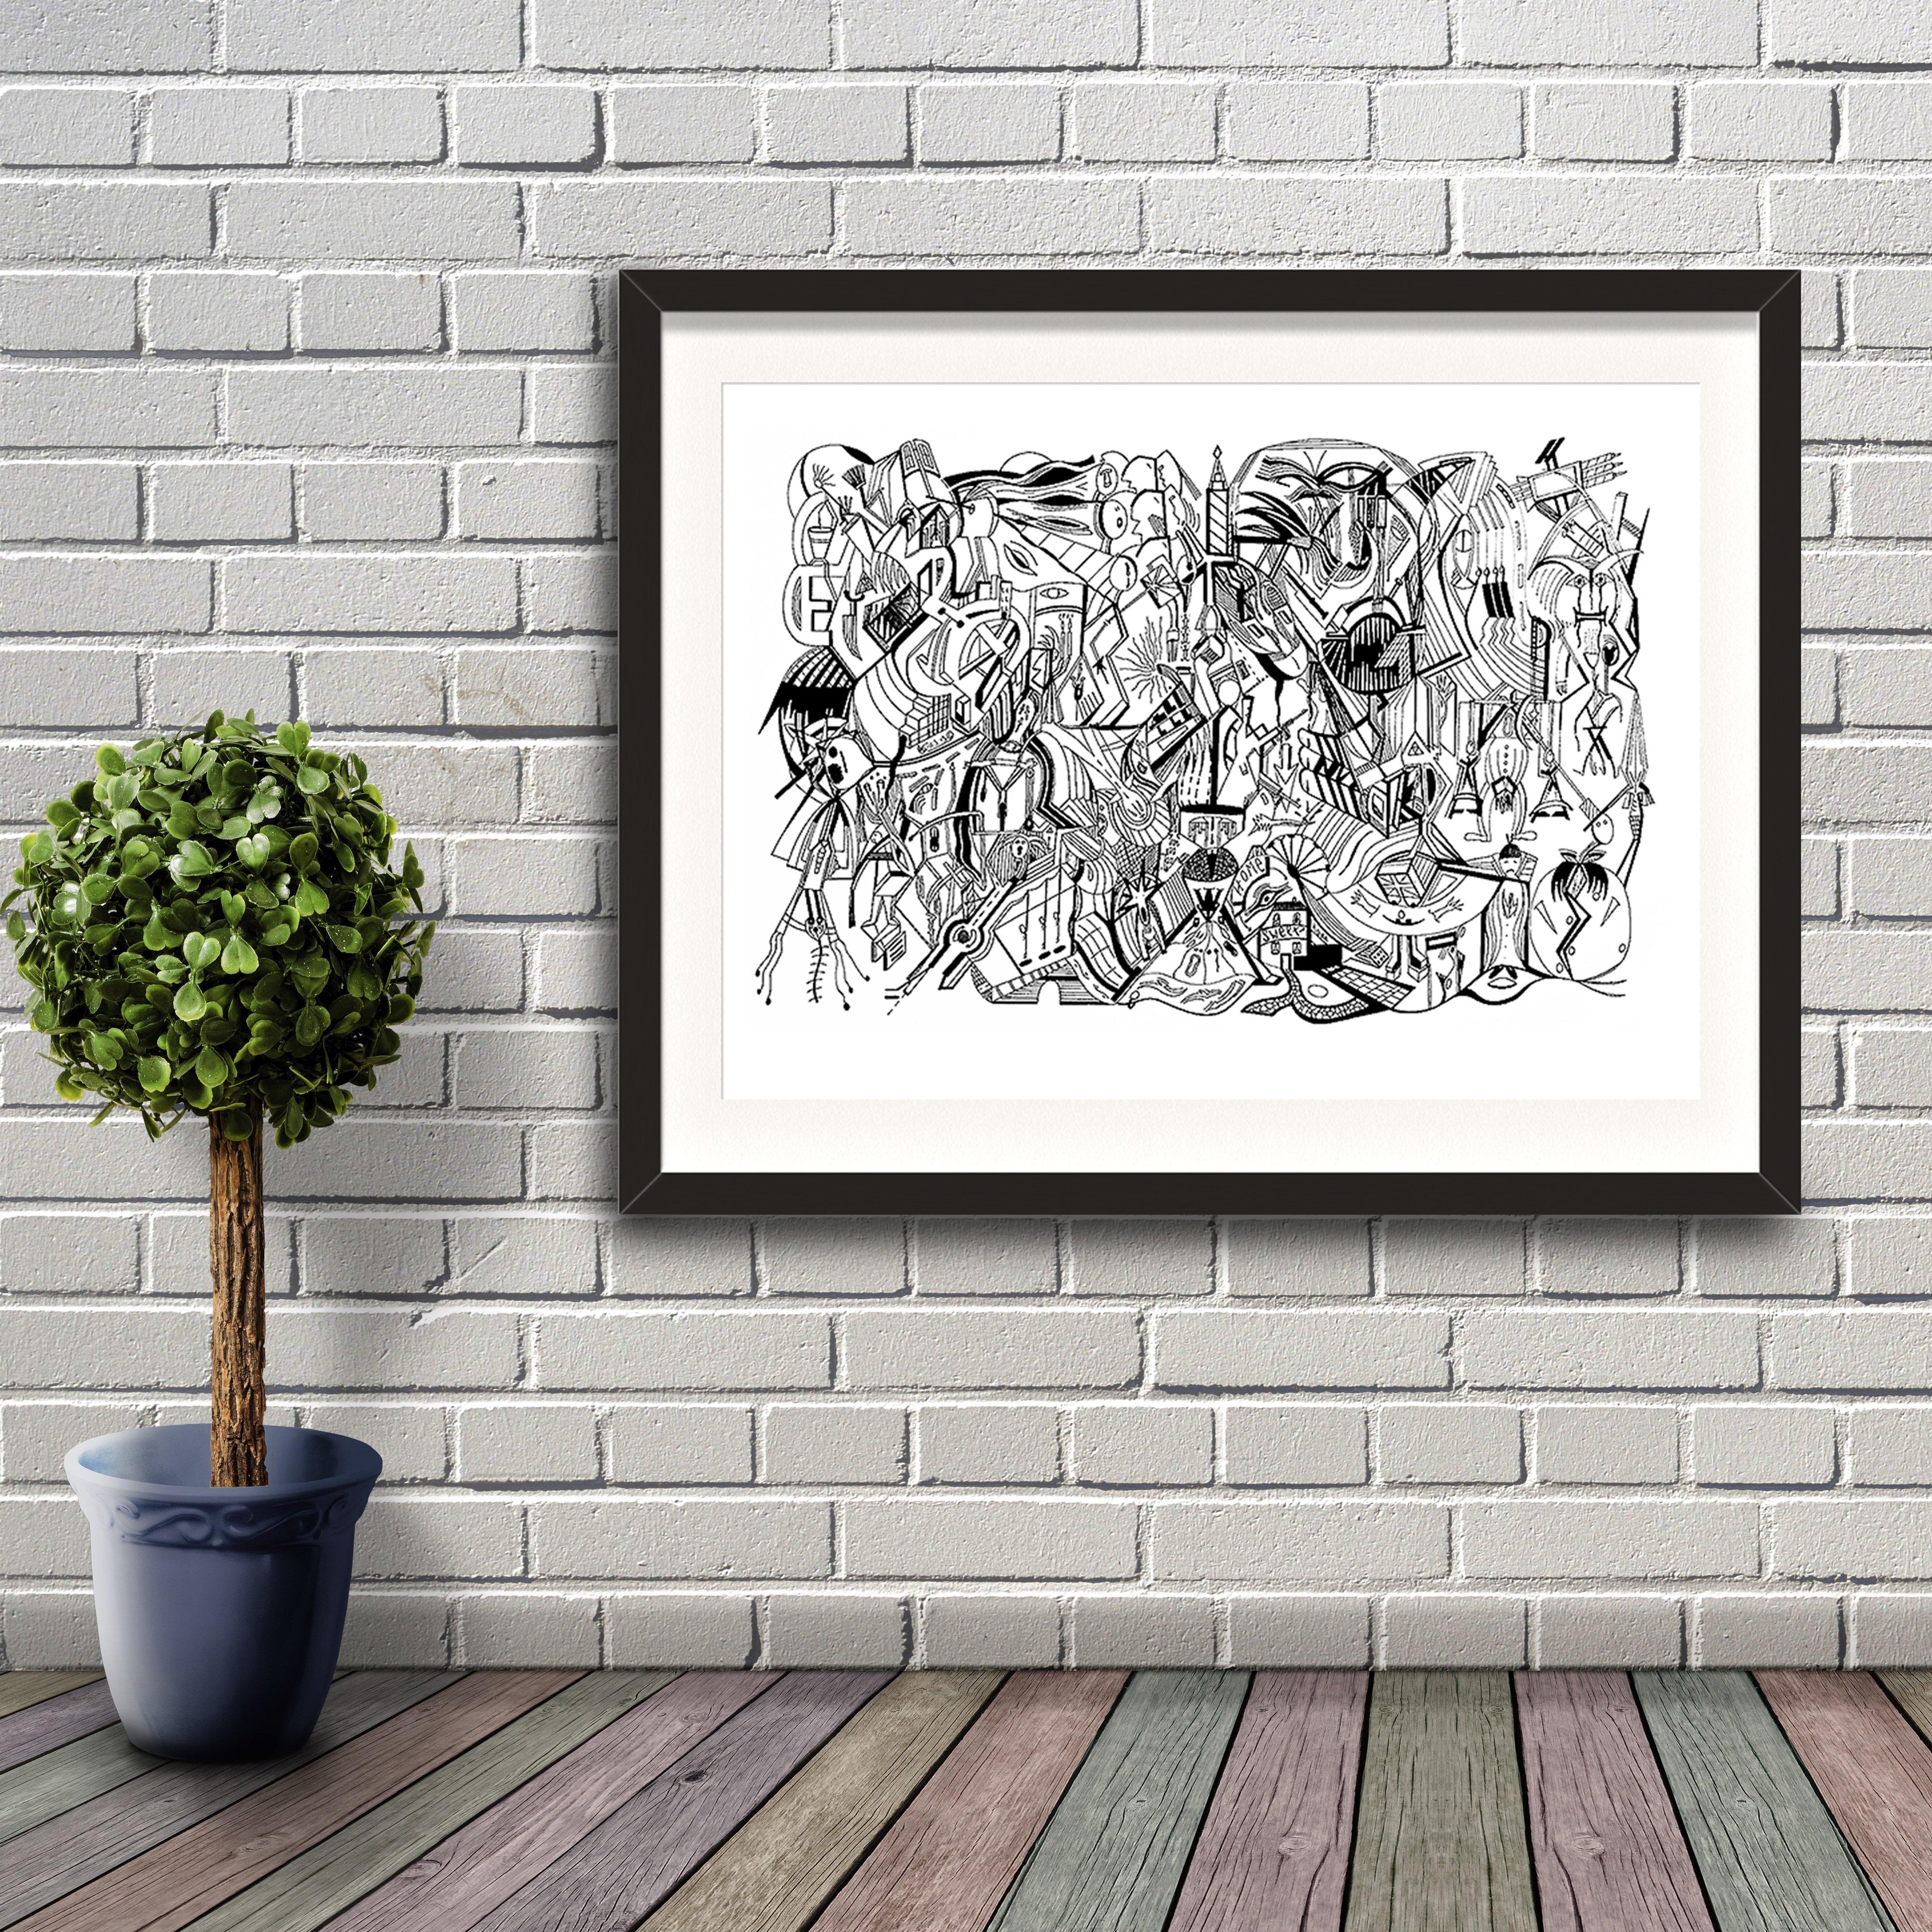 A fine art print from Jason Clarke titled Watching You drawn with a black Pentel pen. Dated 11/3/13. Artwork shown in a black frame hanging on a brick wall.